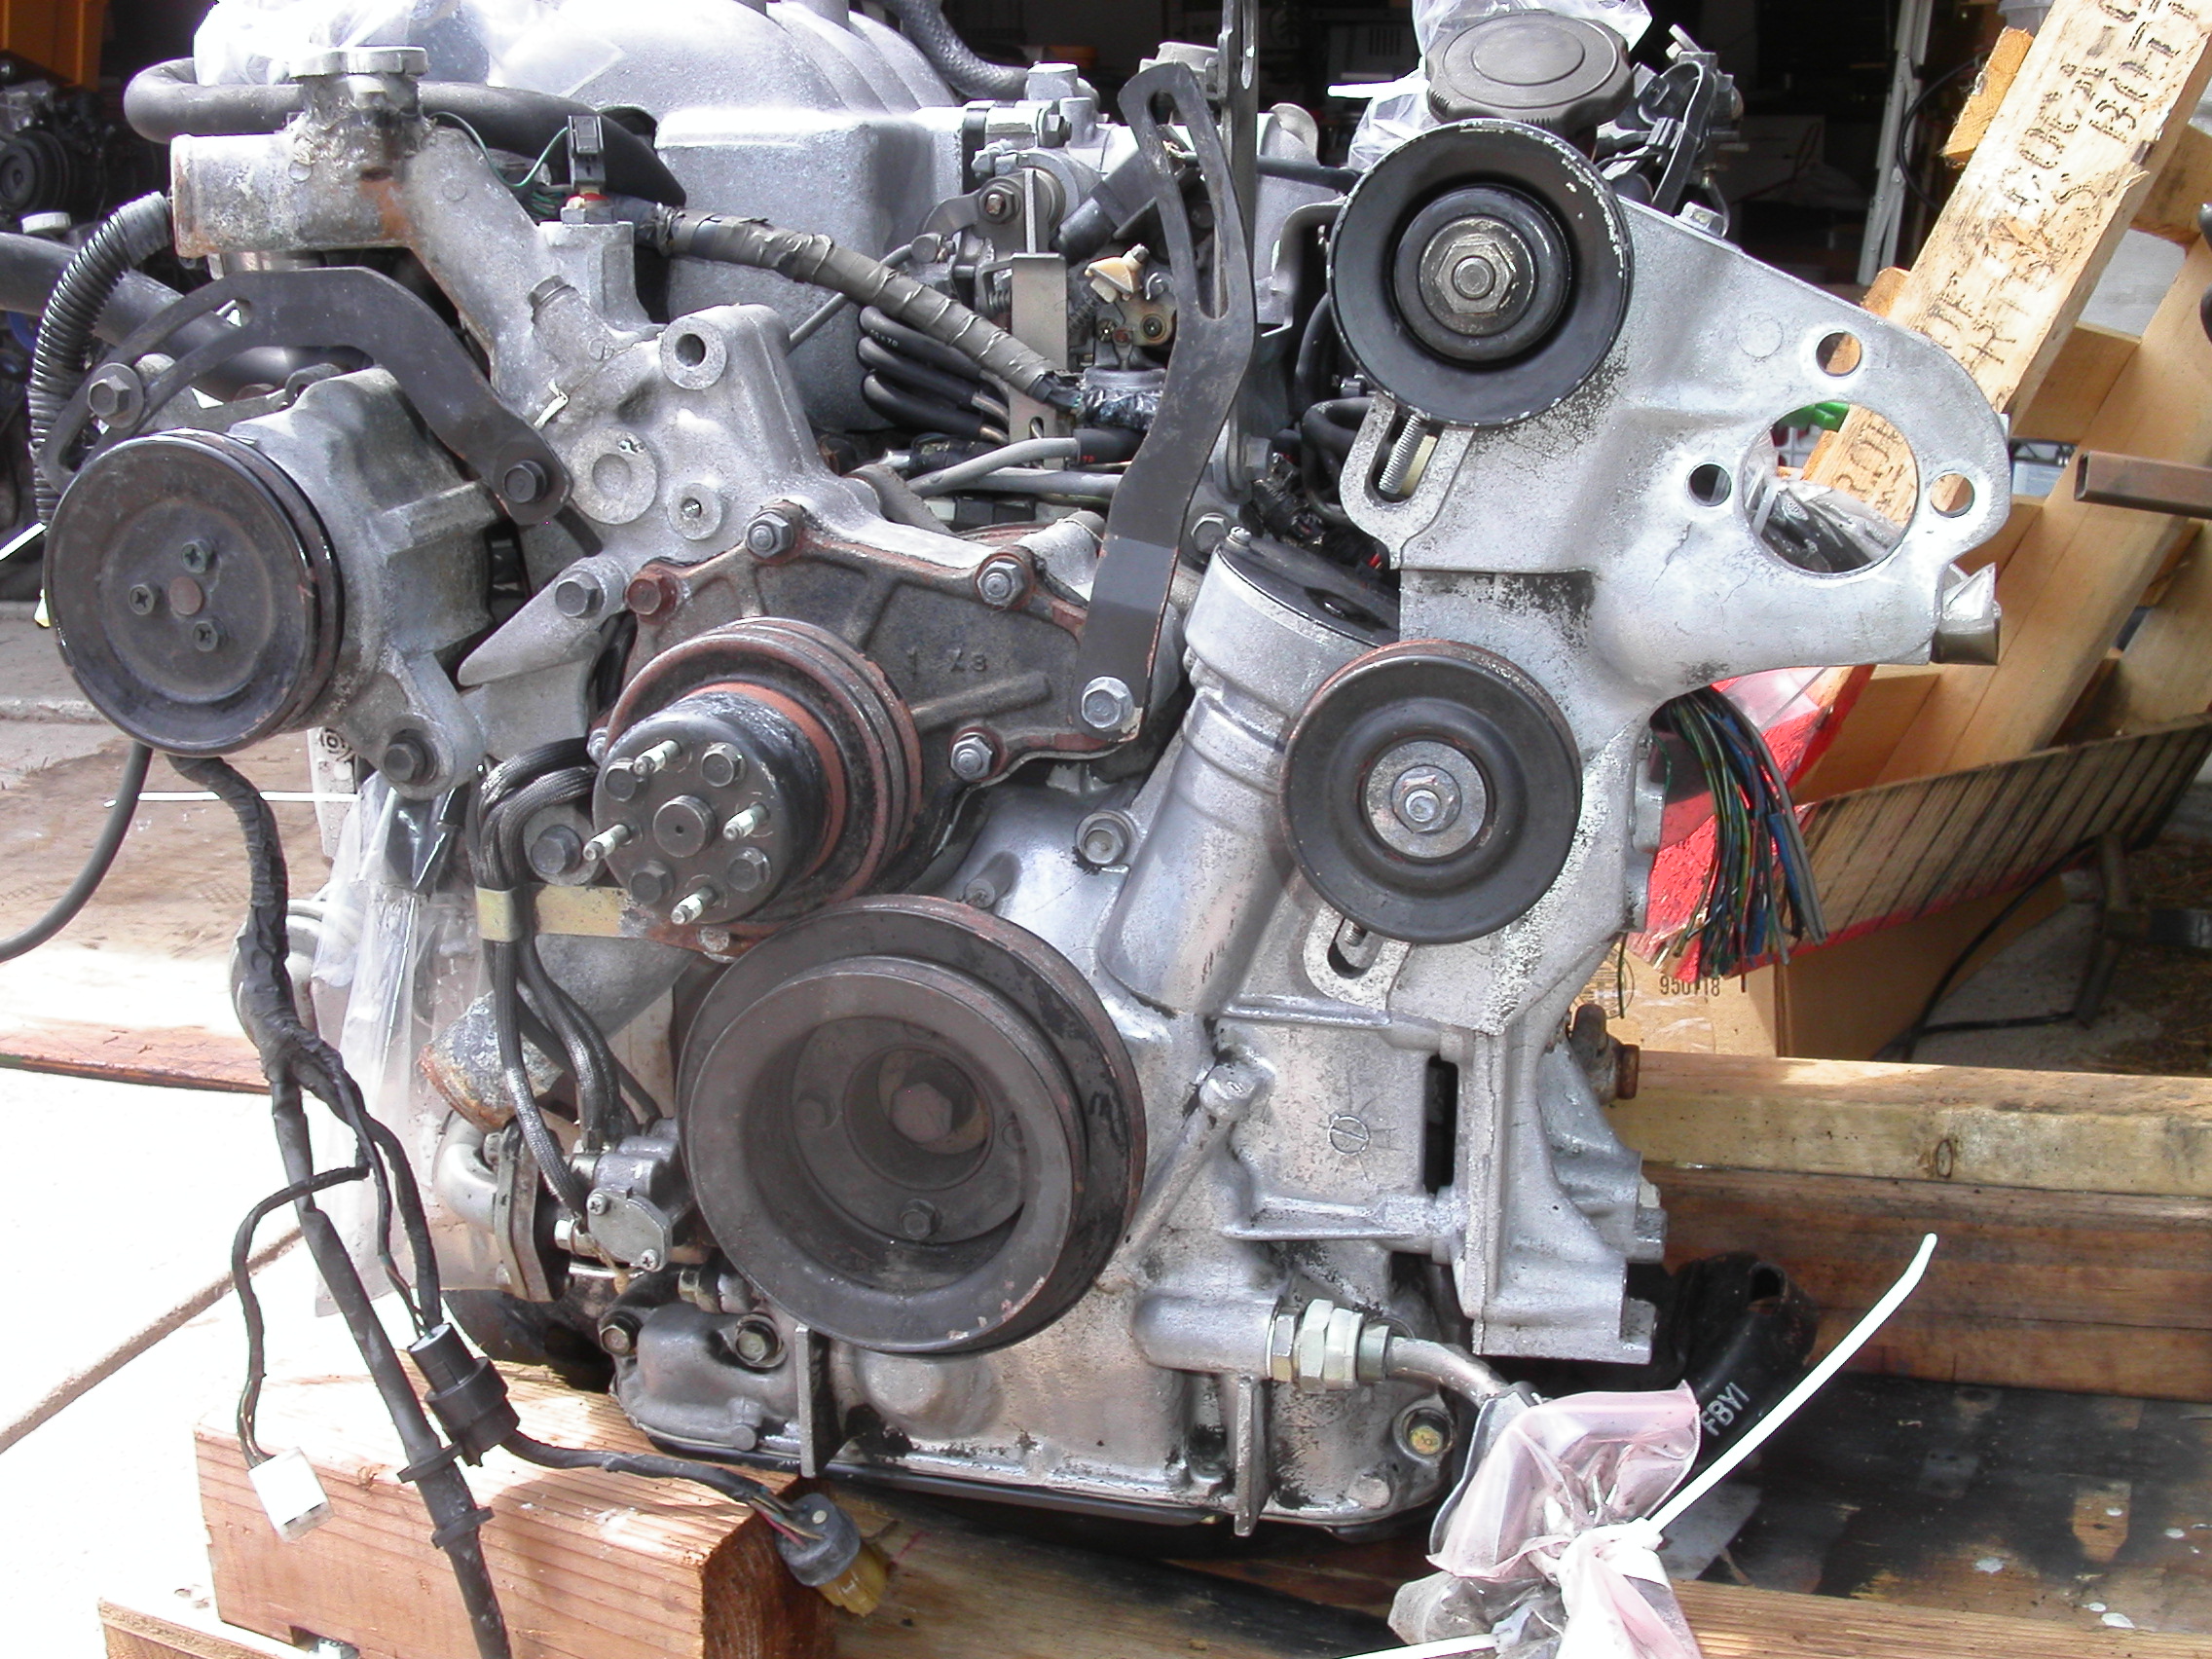 RX7 Turbo II Project For Sale | Engines